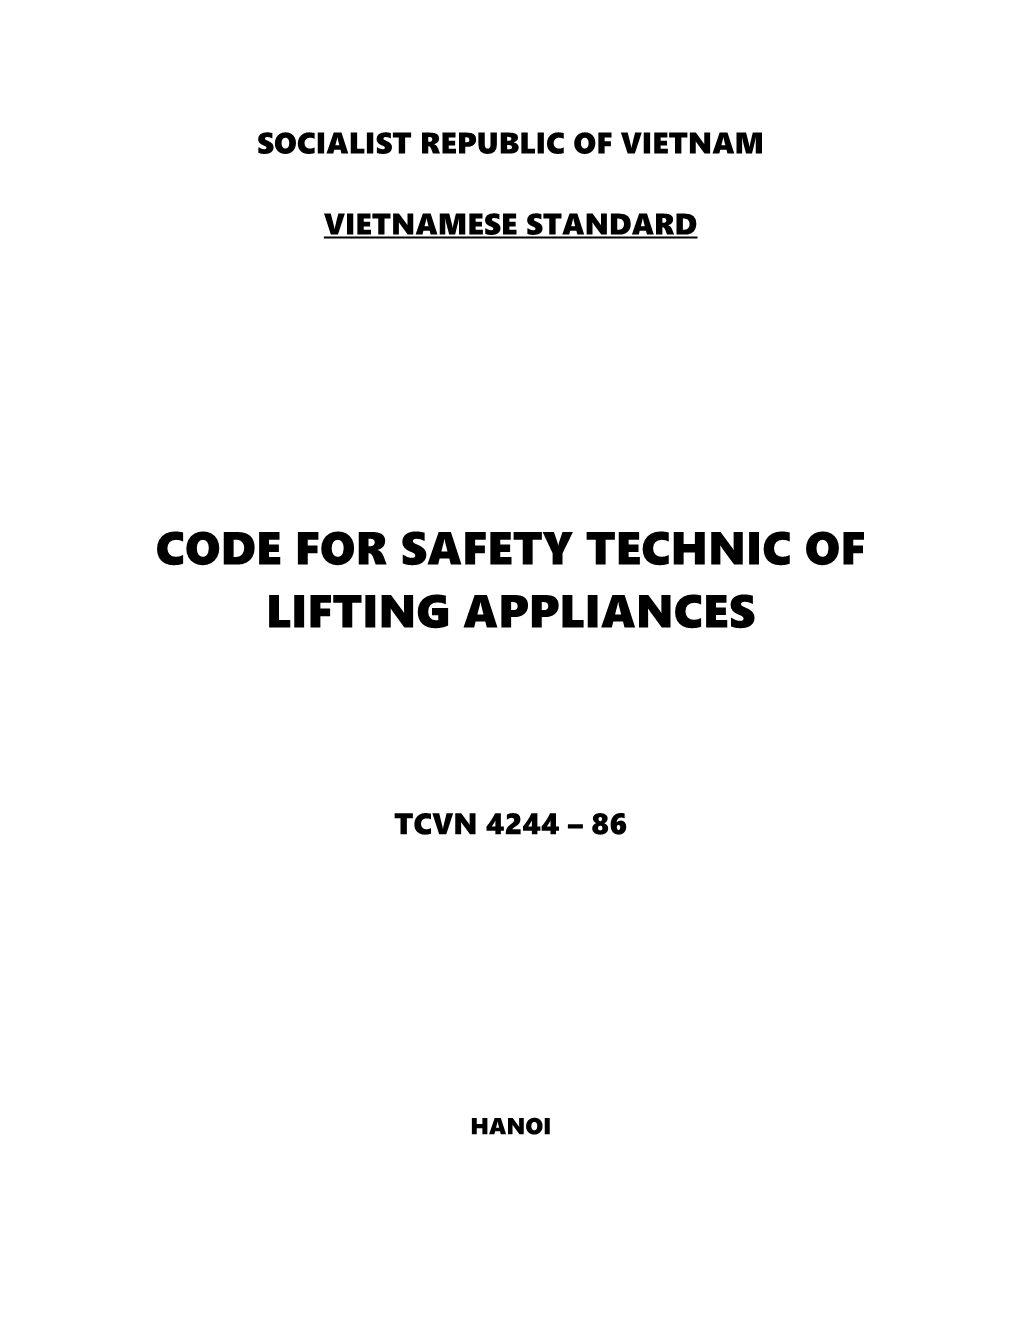 Code for Safety Technic of Lifting Appliances